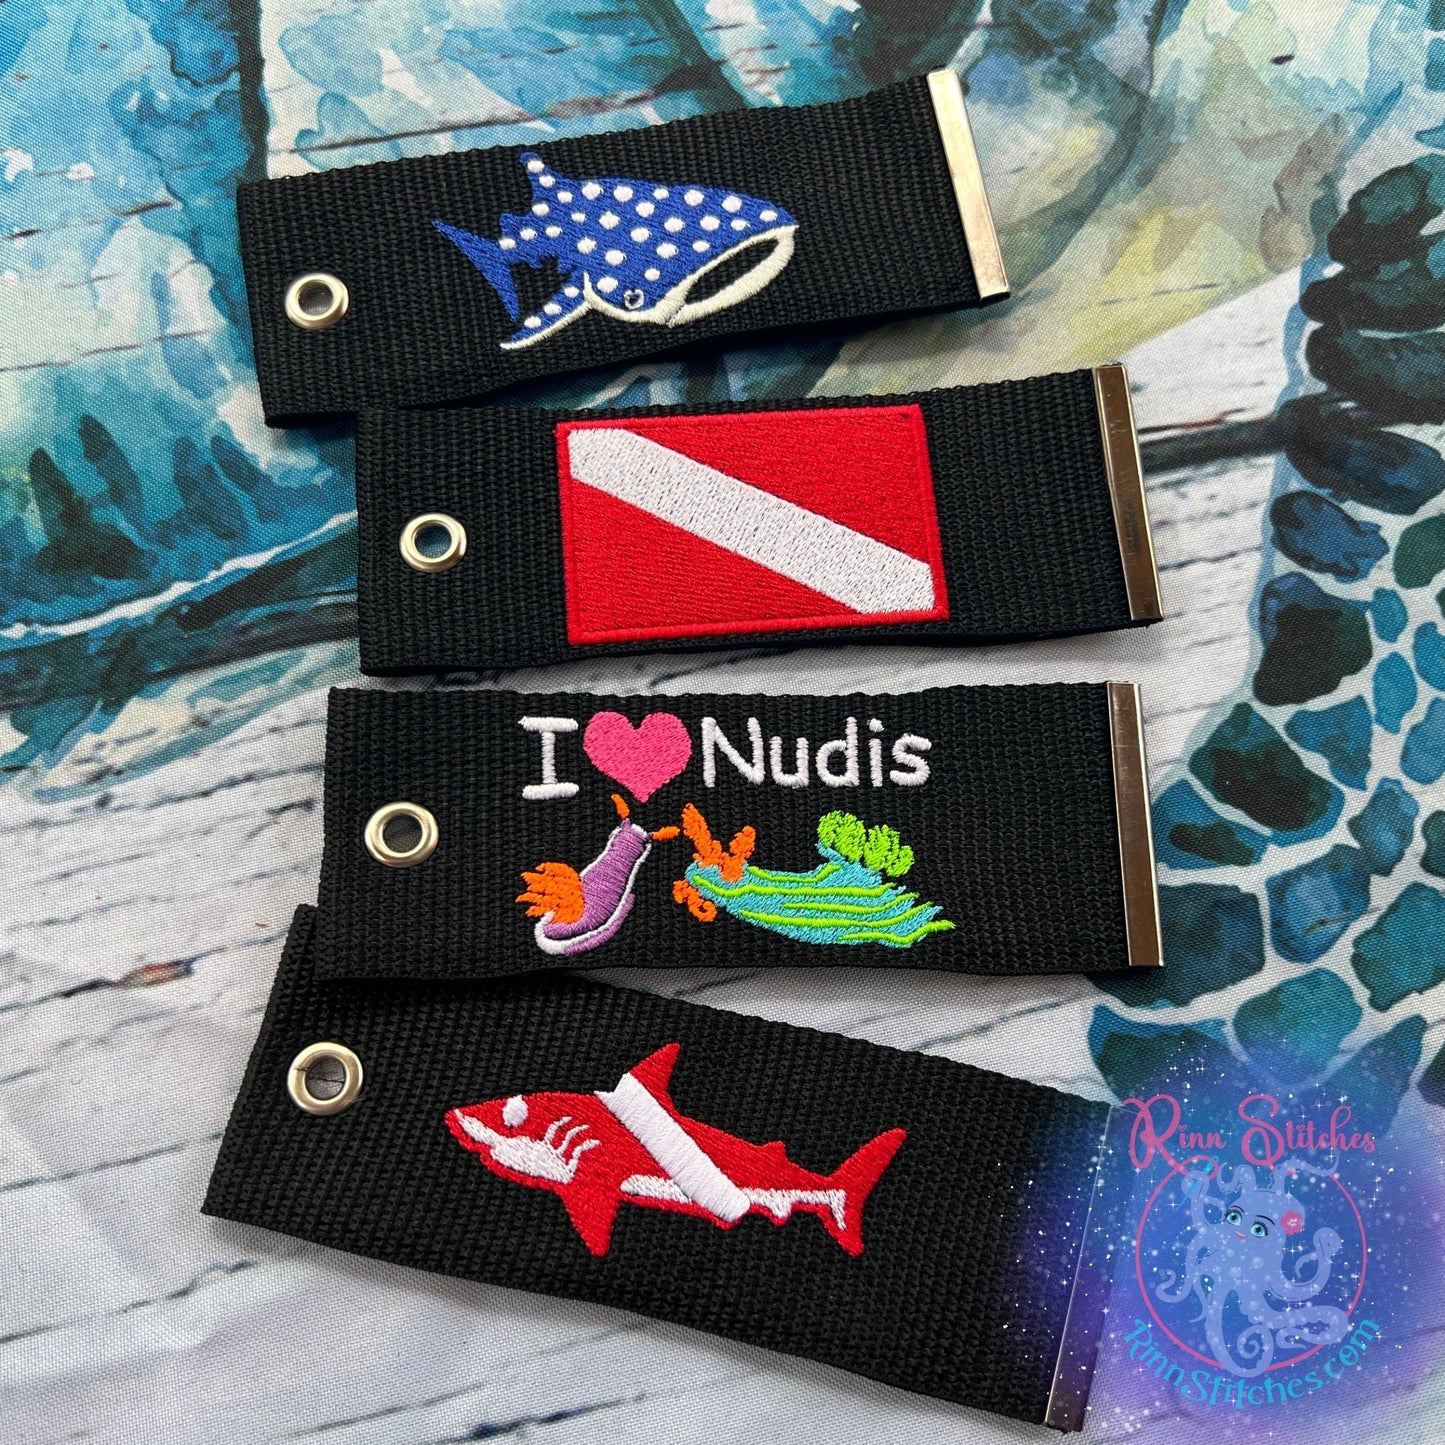 Blue Nudi - Nudibranch Luggage Tag, Personalized Embroidered Bag Tag for all your Travel needs